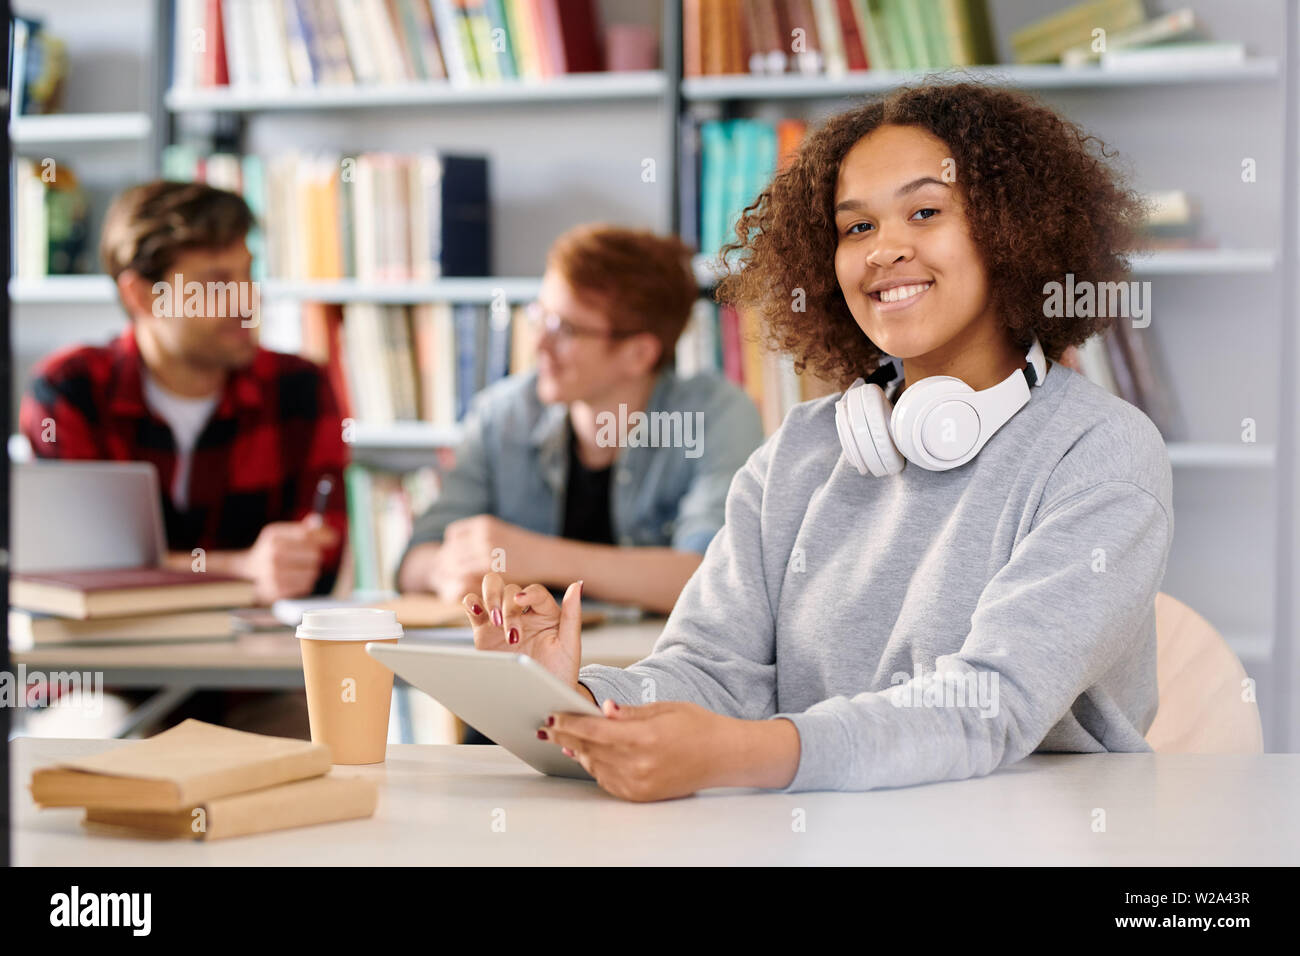 Young cheerful student with tablet getting ready for exam Stock Photo